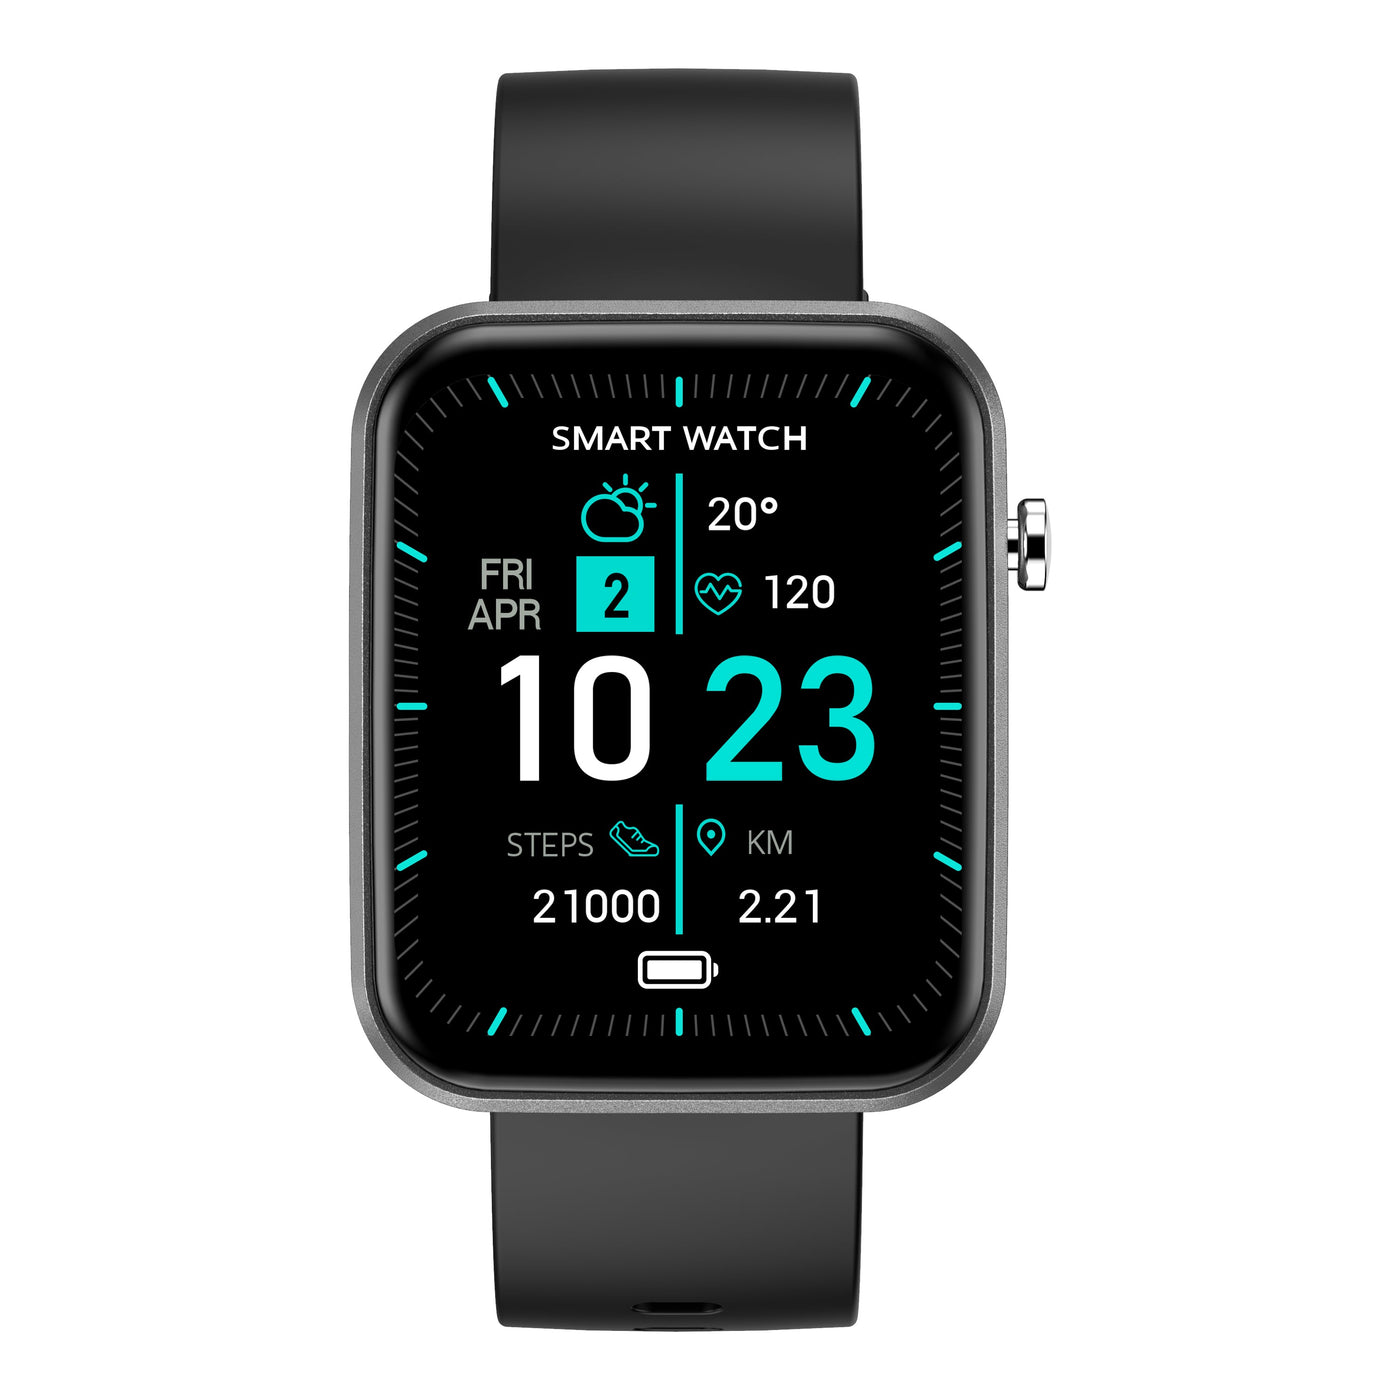 Advanced Smartwatch With Three Bands And Wellness + Activity Tracker by VistaShops